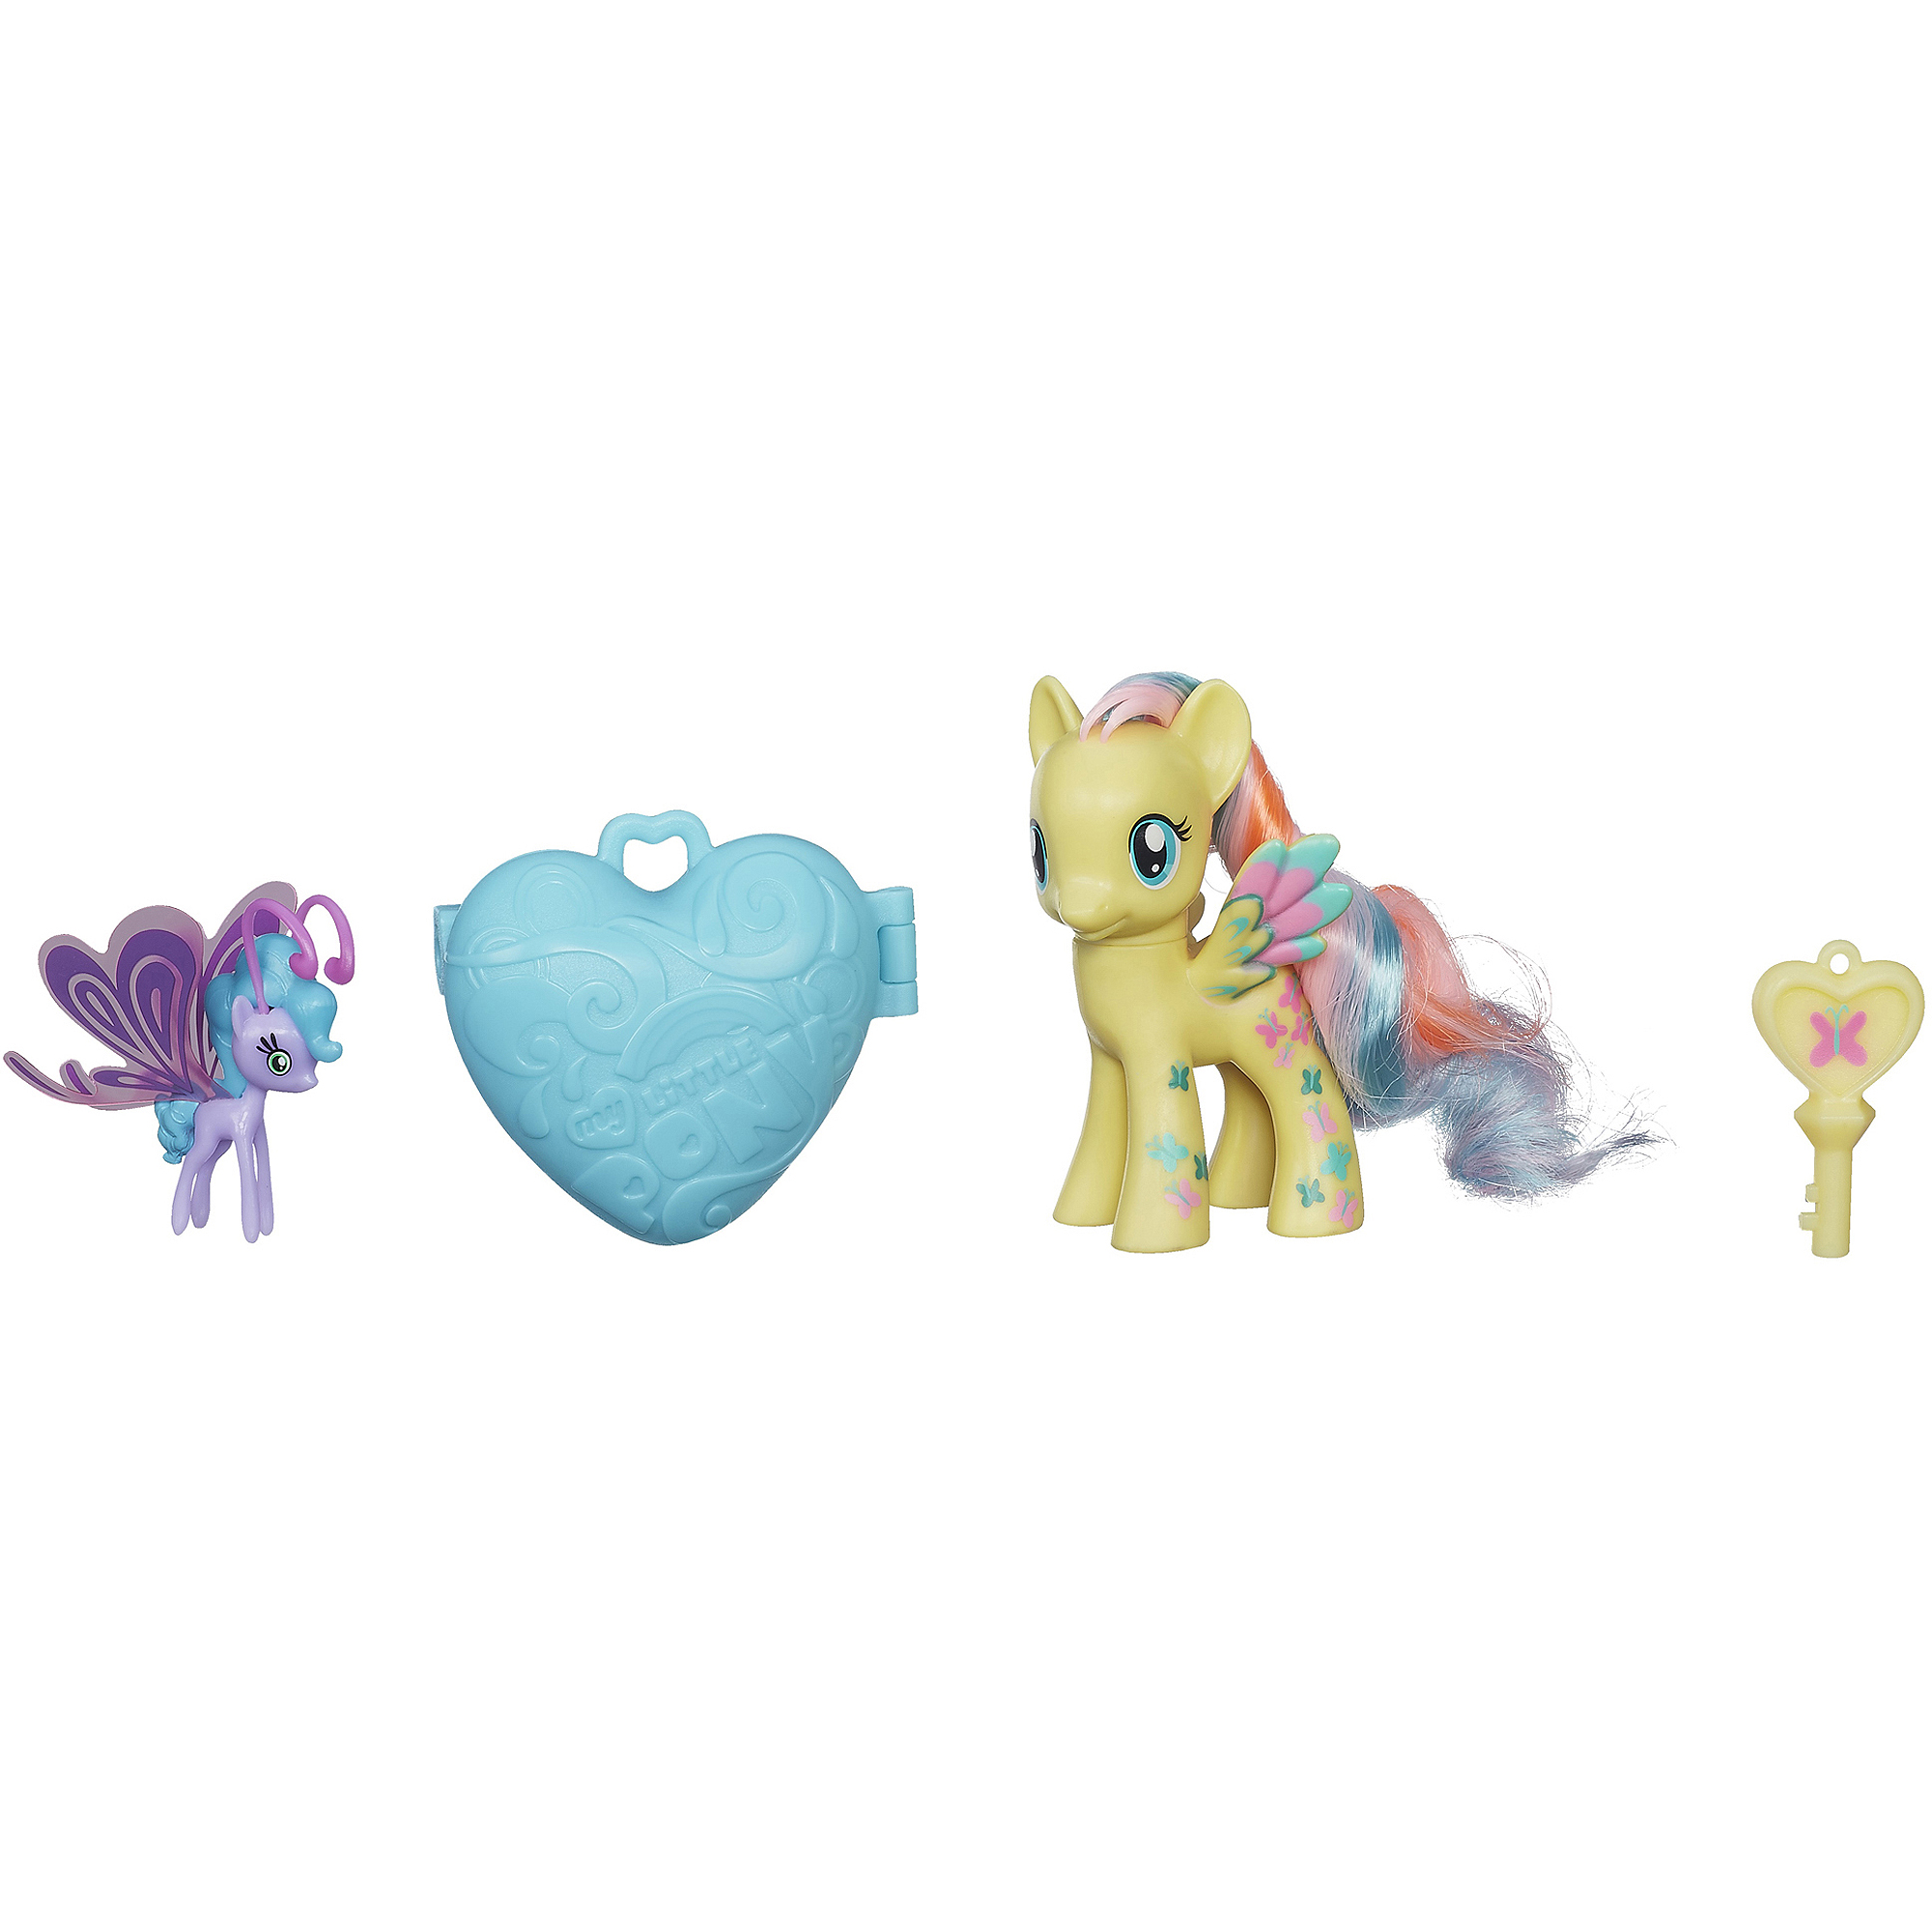 My Little Pony Fluttershy and Sea Breezie Figures - image 1 of 2